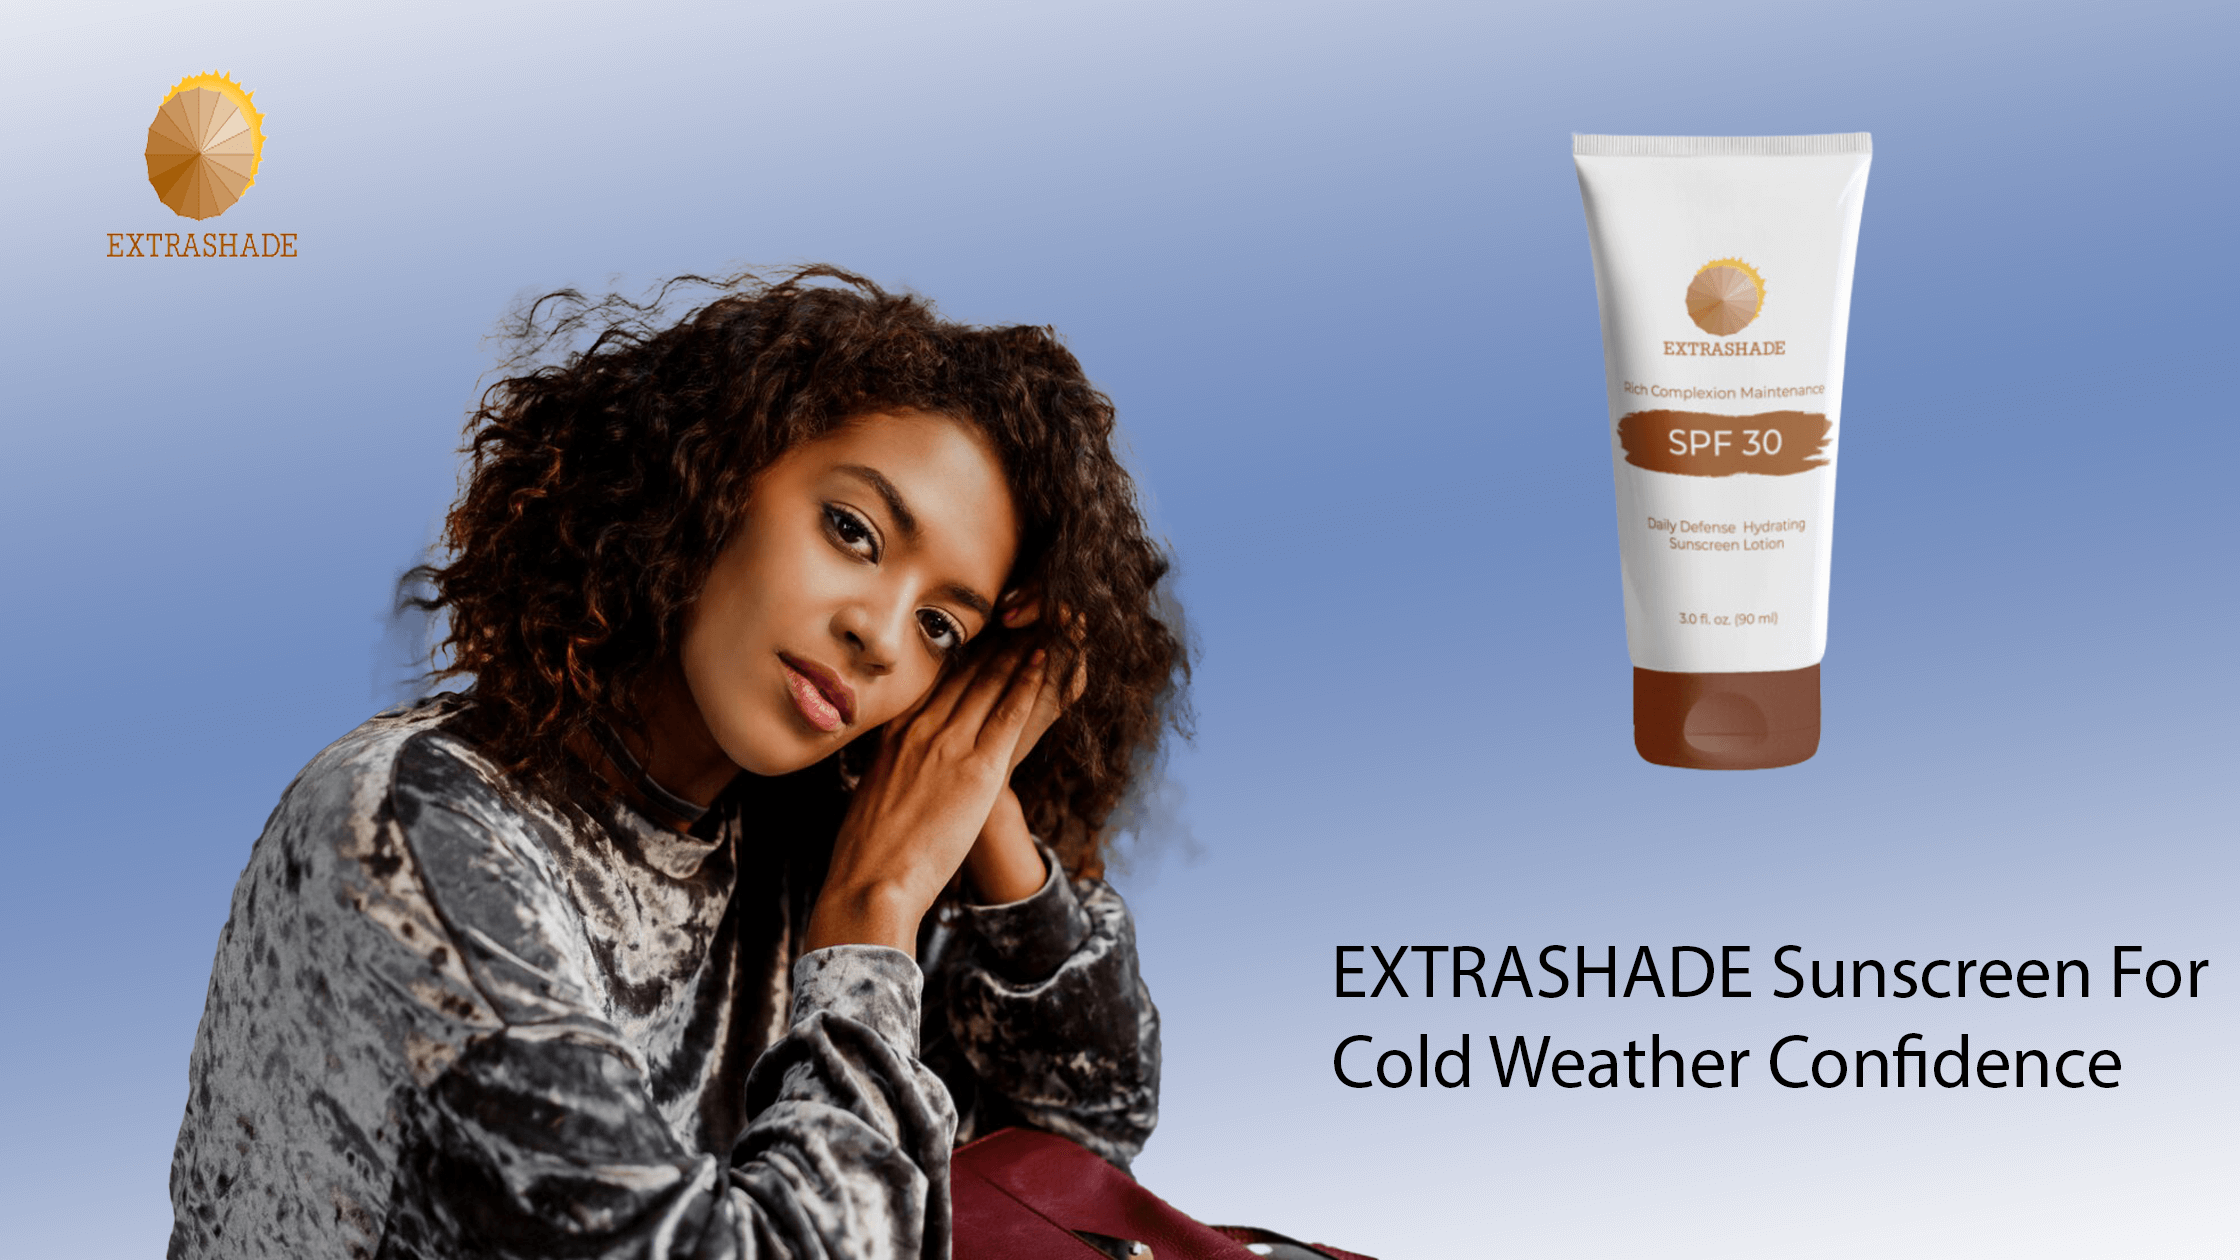 Winter Bliss EXTRASHADE Sunscreen For Cold Weather Confidence 1